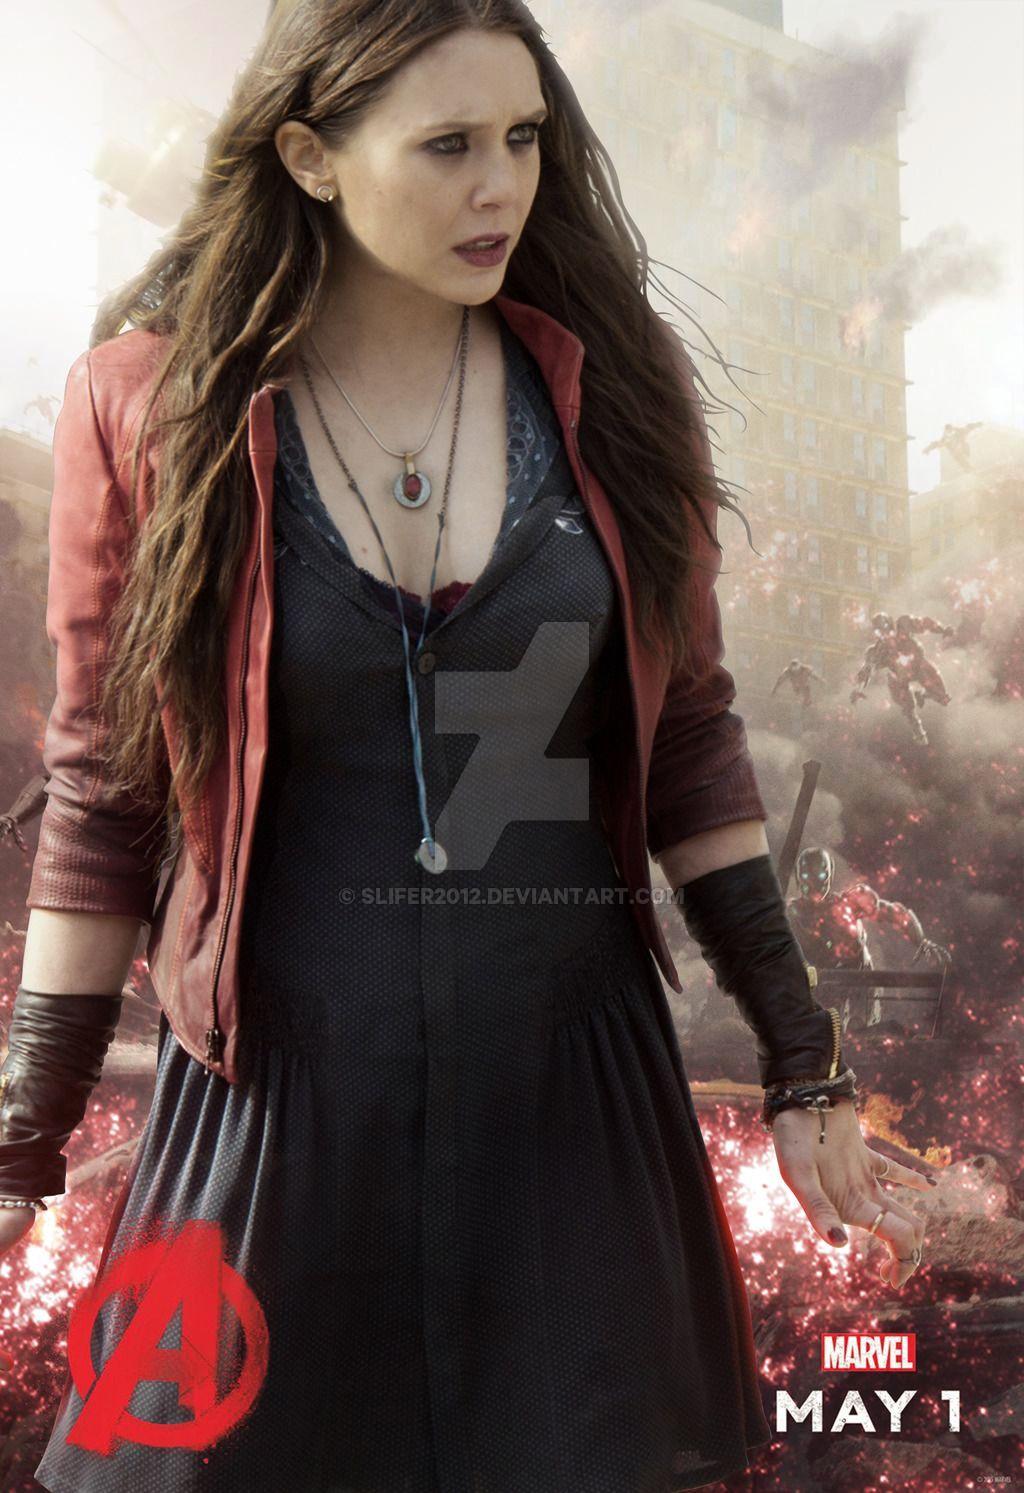 Scarlet Witch Avengers: Age of Ultron